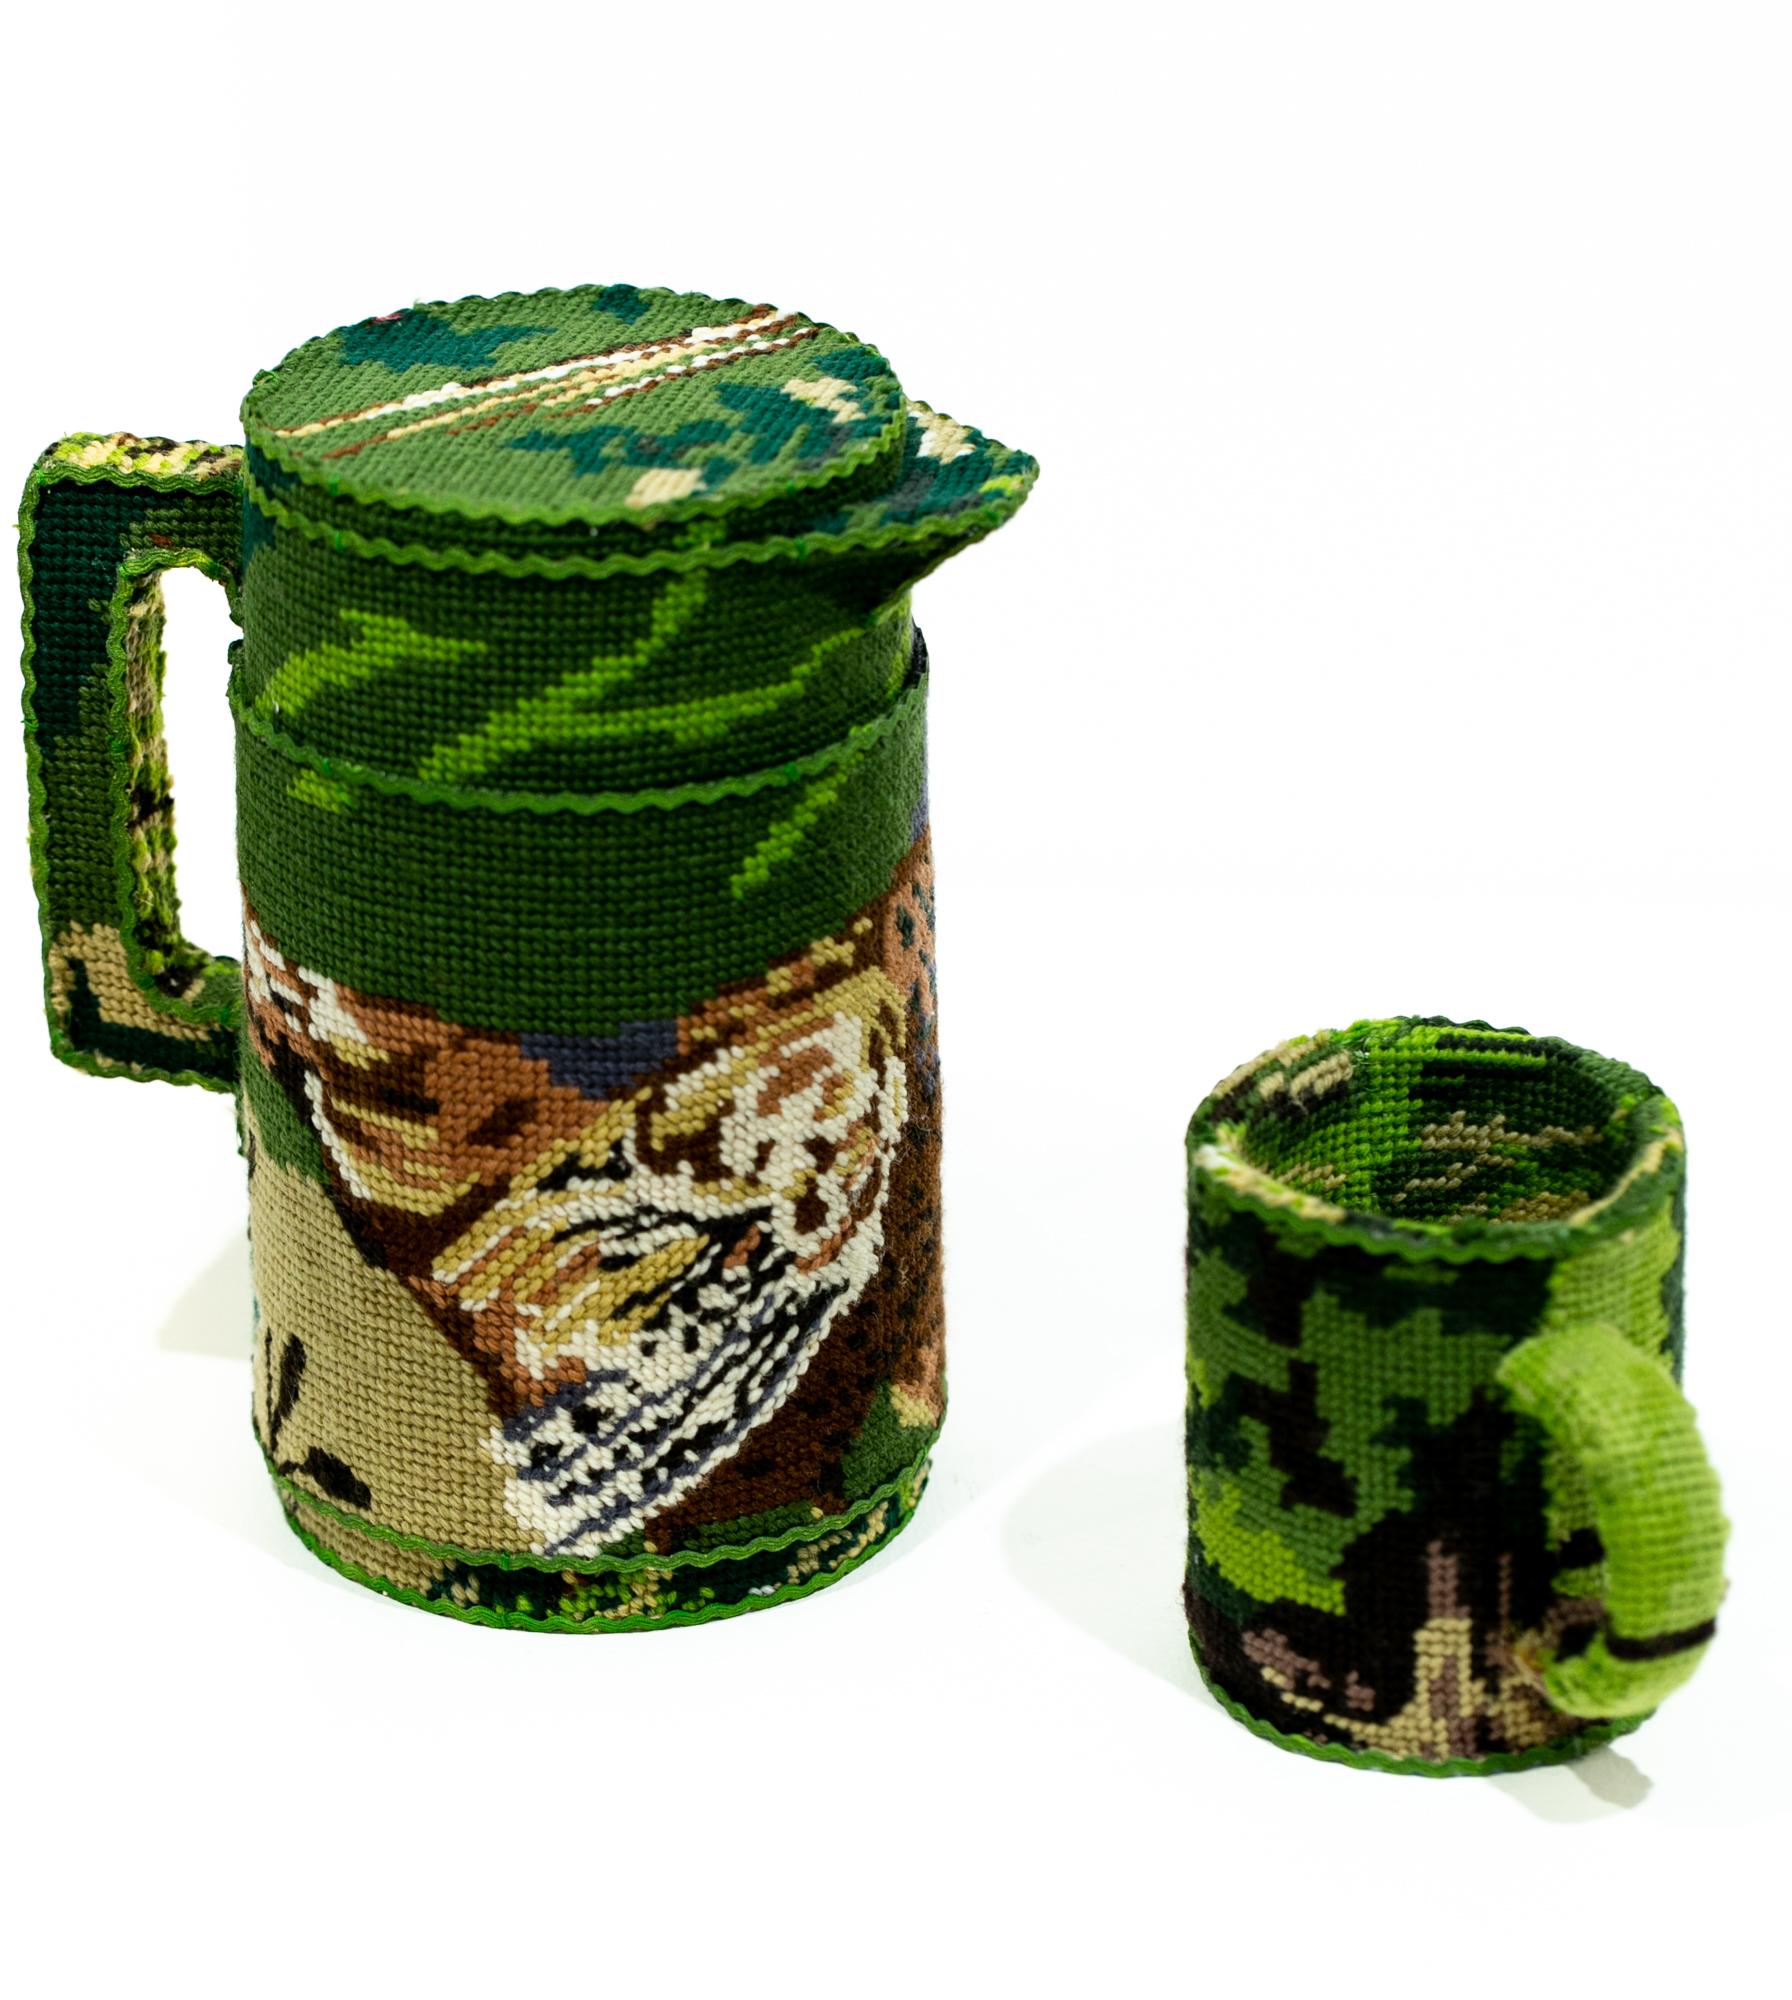 "Thermos and Mug", Needlepoint Embroidery, Textile Art, Found Object Sculpture